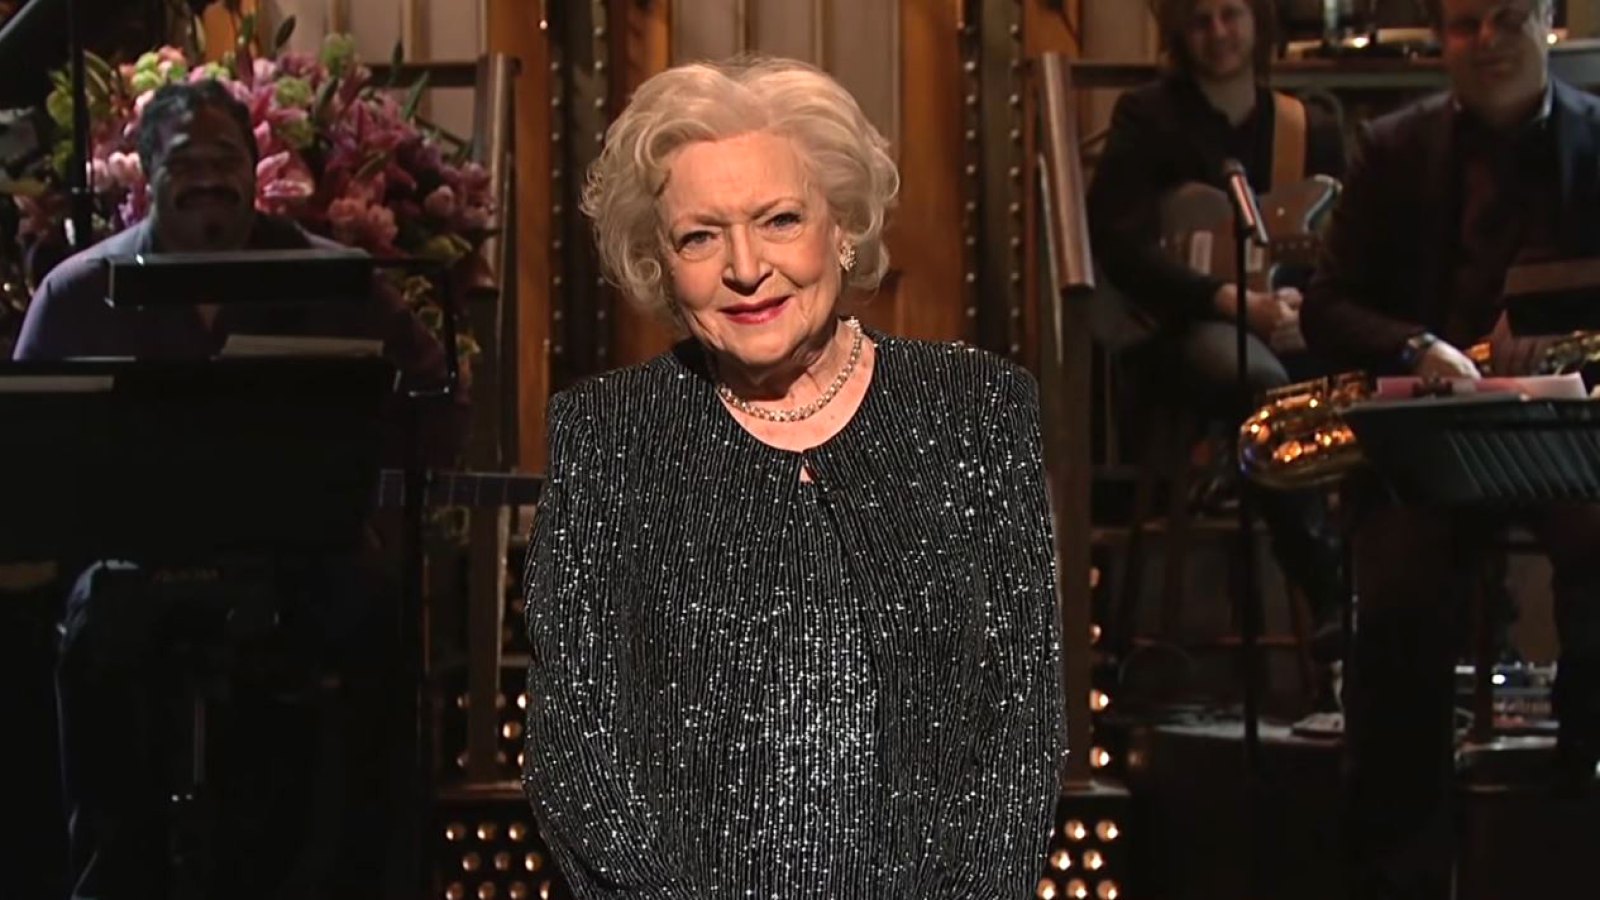 'Saturday Night Live' Airs 2010 Betty White Episode After Her Death: 'Rest in Peace'